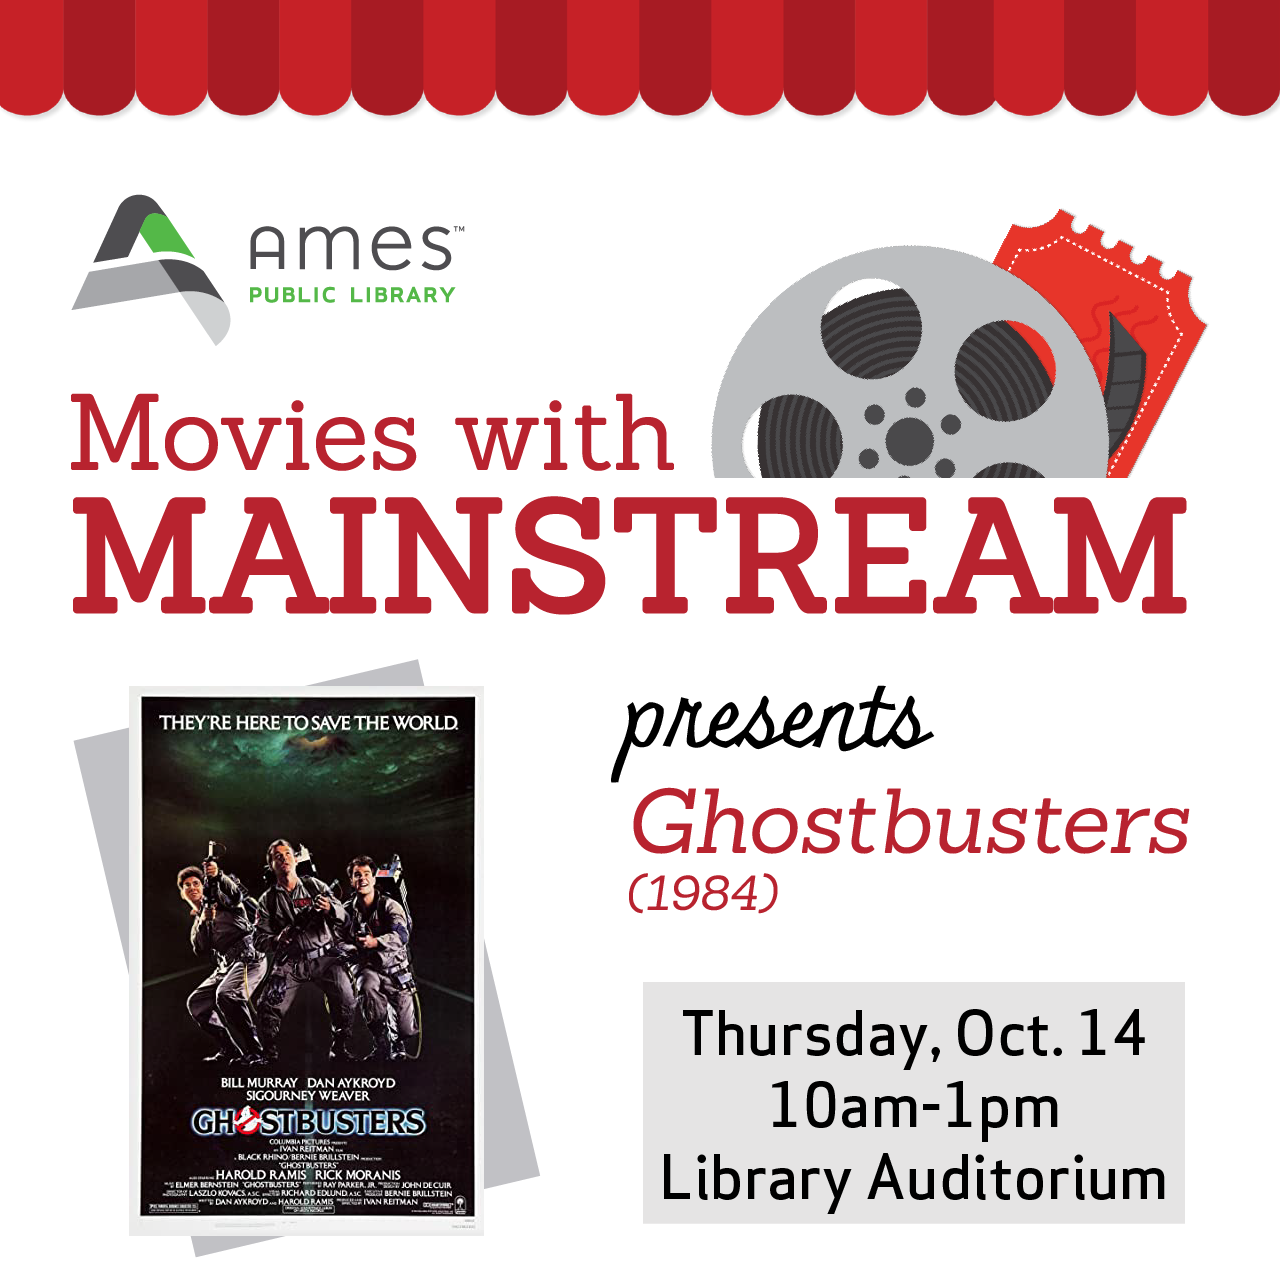 Movies with Mainstream presents Ghostbusters (1984) Thursday, Oct. 14, 10am-1pm, Library Auditorium